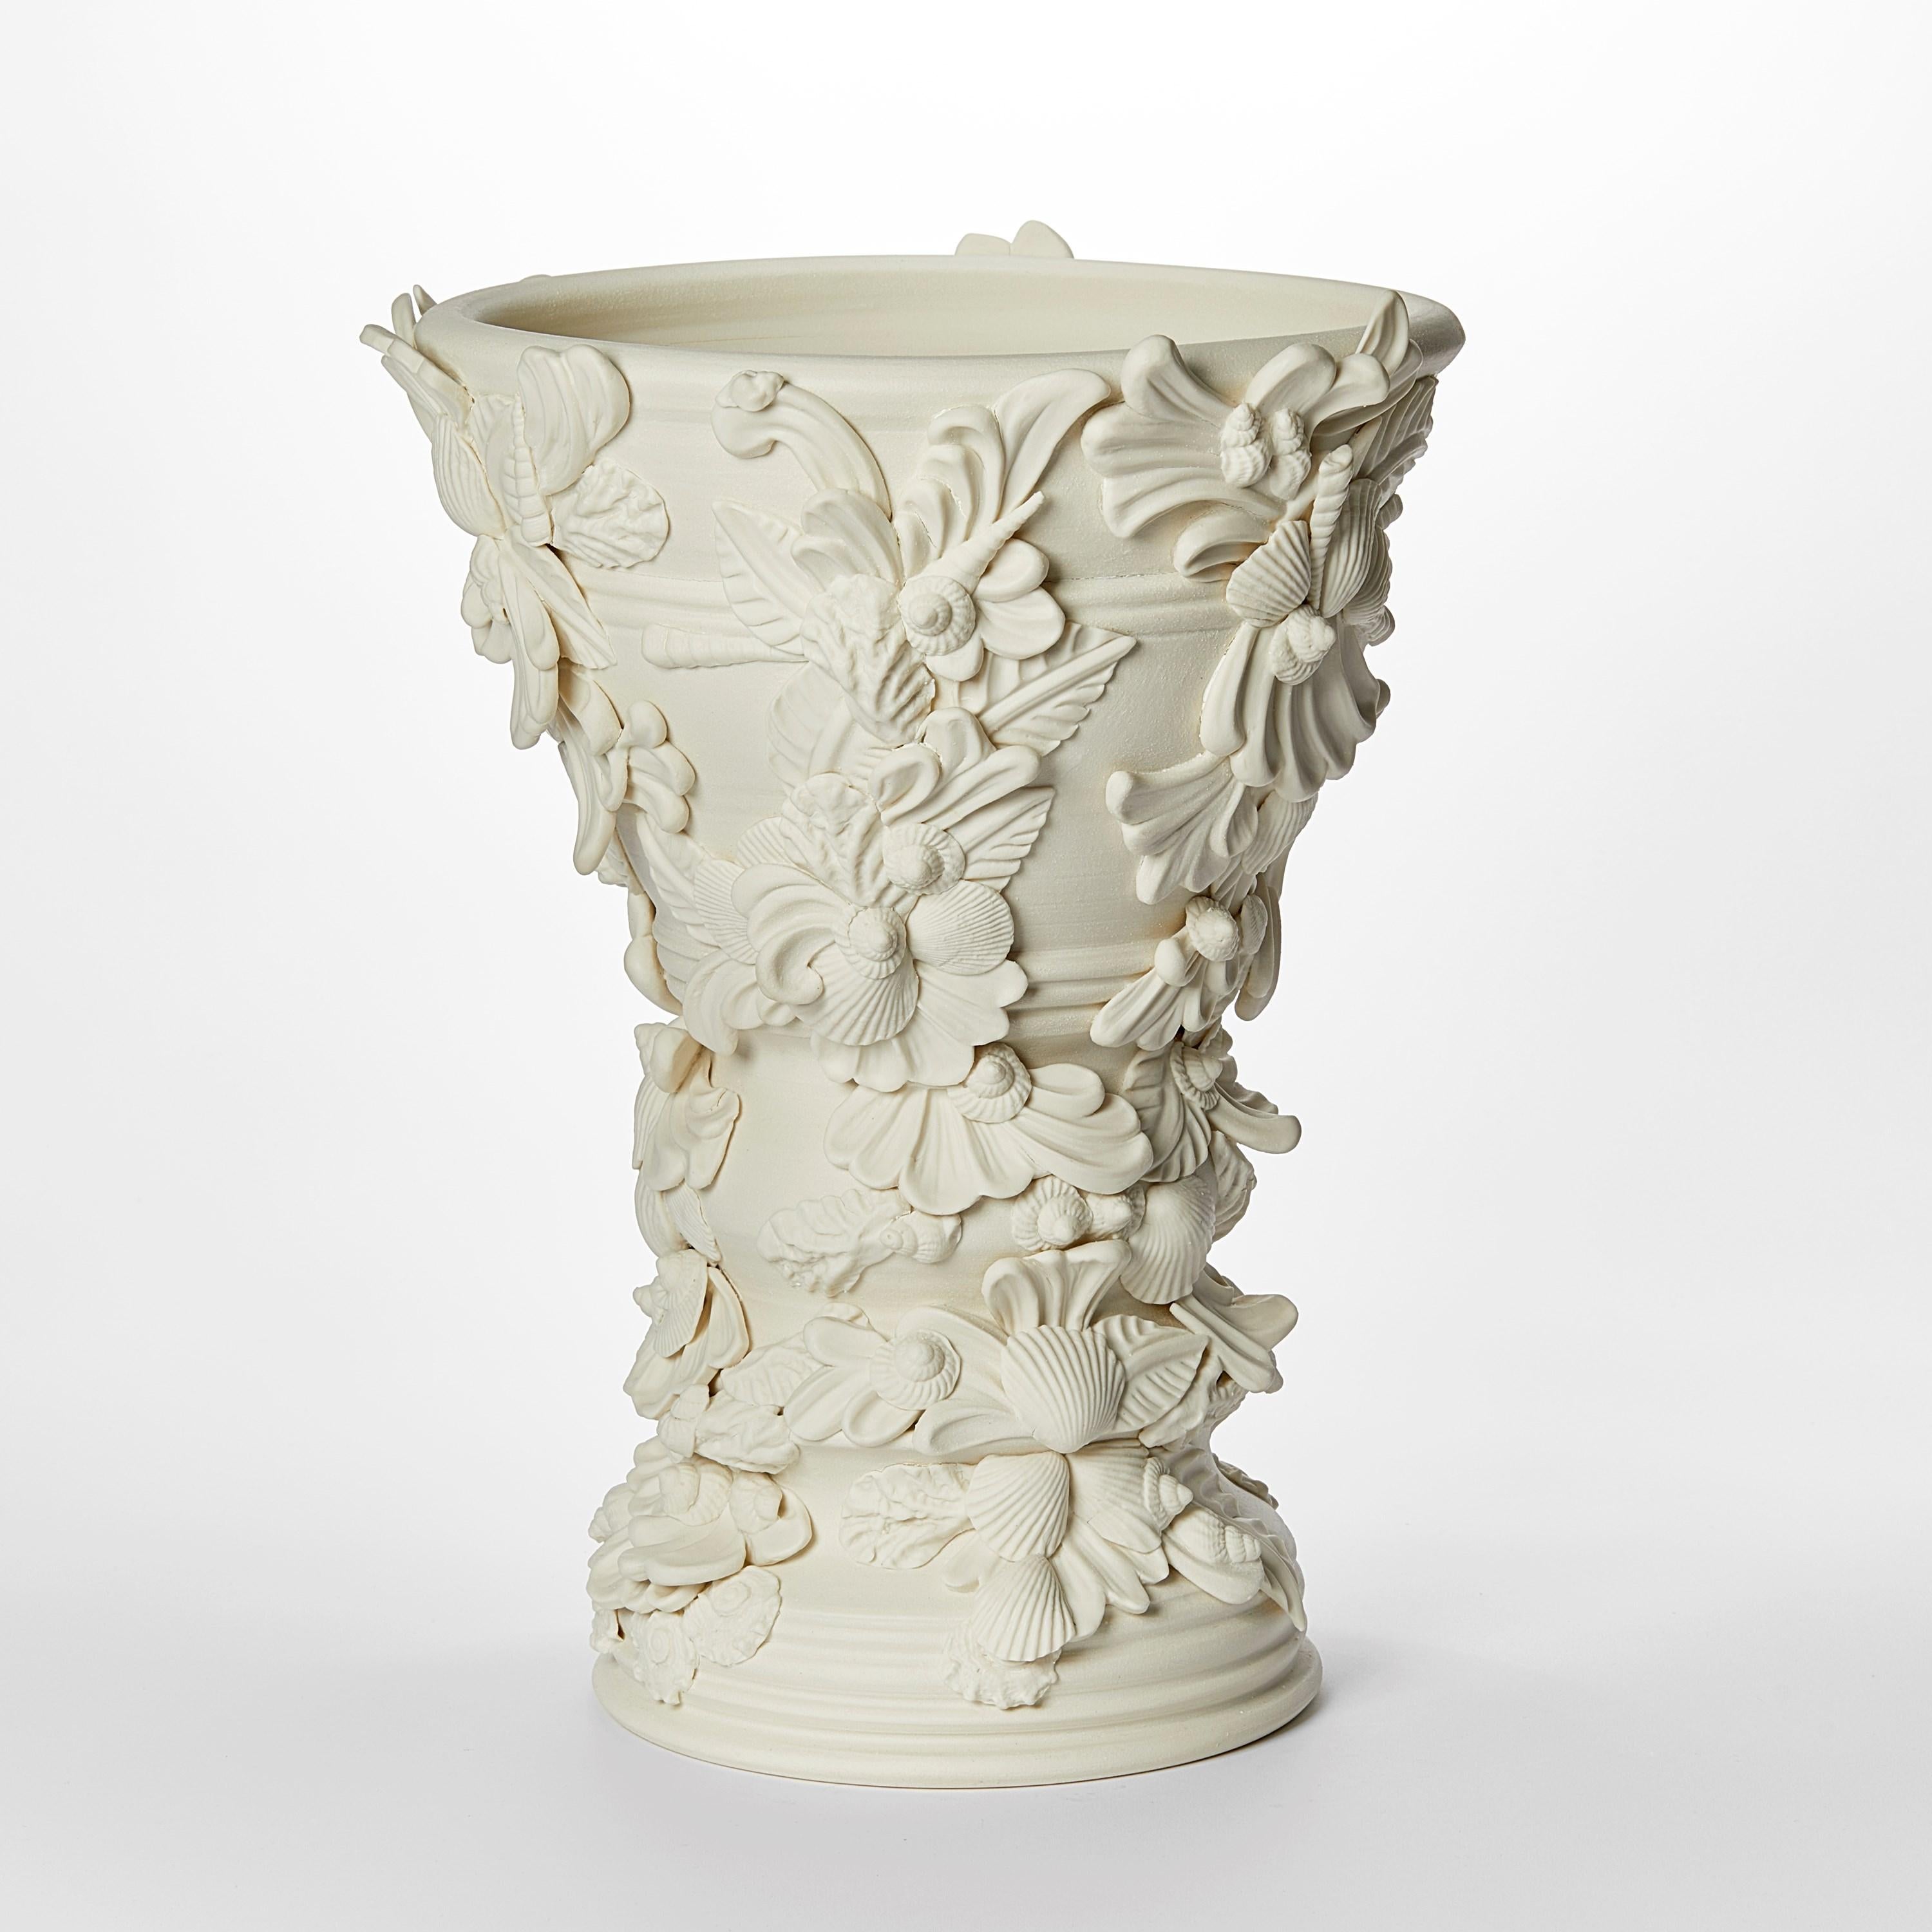 'Rocaille III’ is a unique porcelain sculpture by the British artist, Jo Taylor.

Taylor’s inspiration comes from highly decorative architectural features such as ornate plaster ceilings, wrought iron and carved stone. Living near the Georgian city